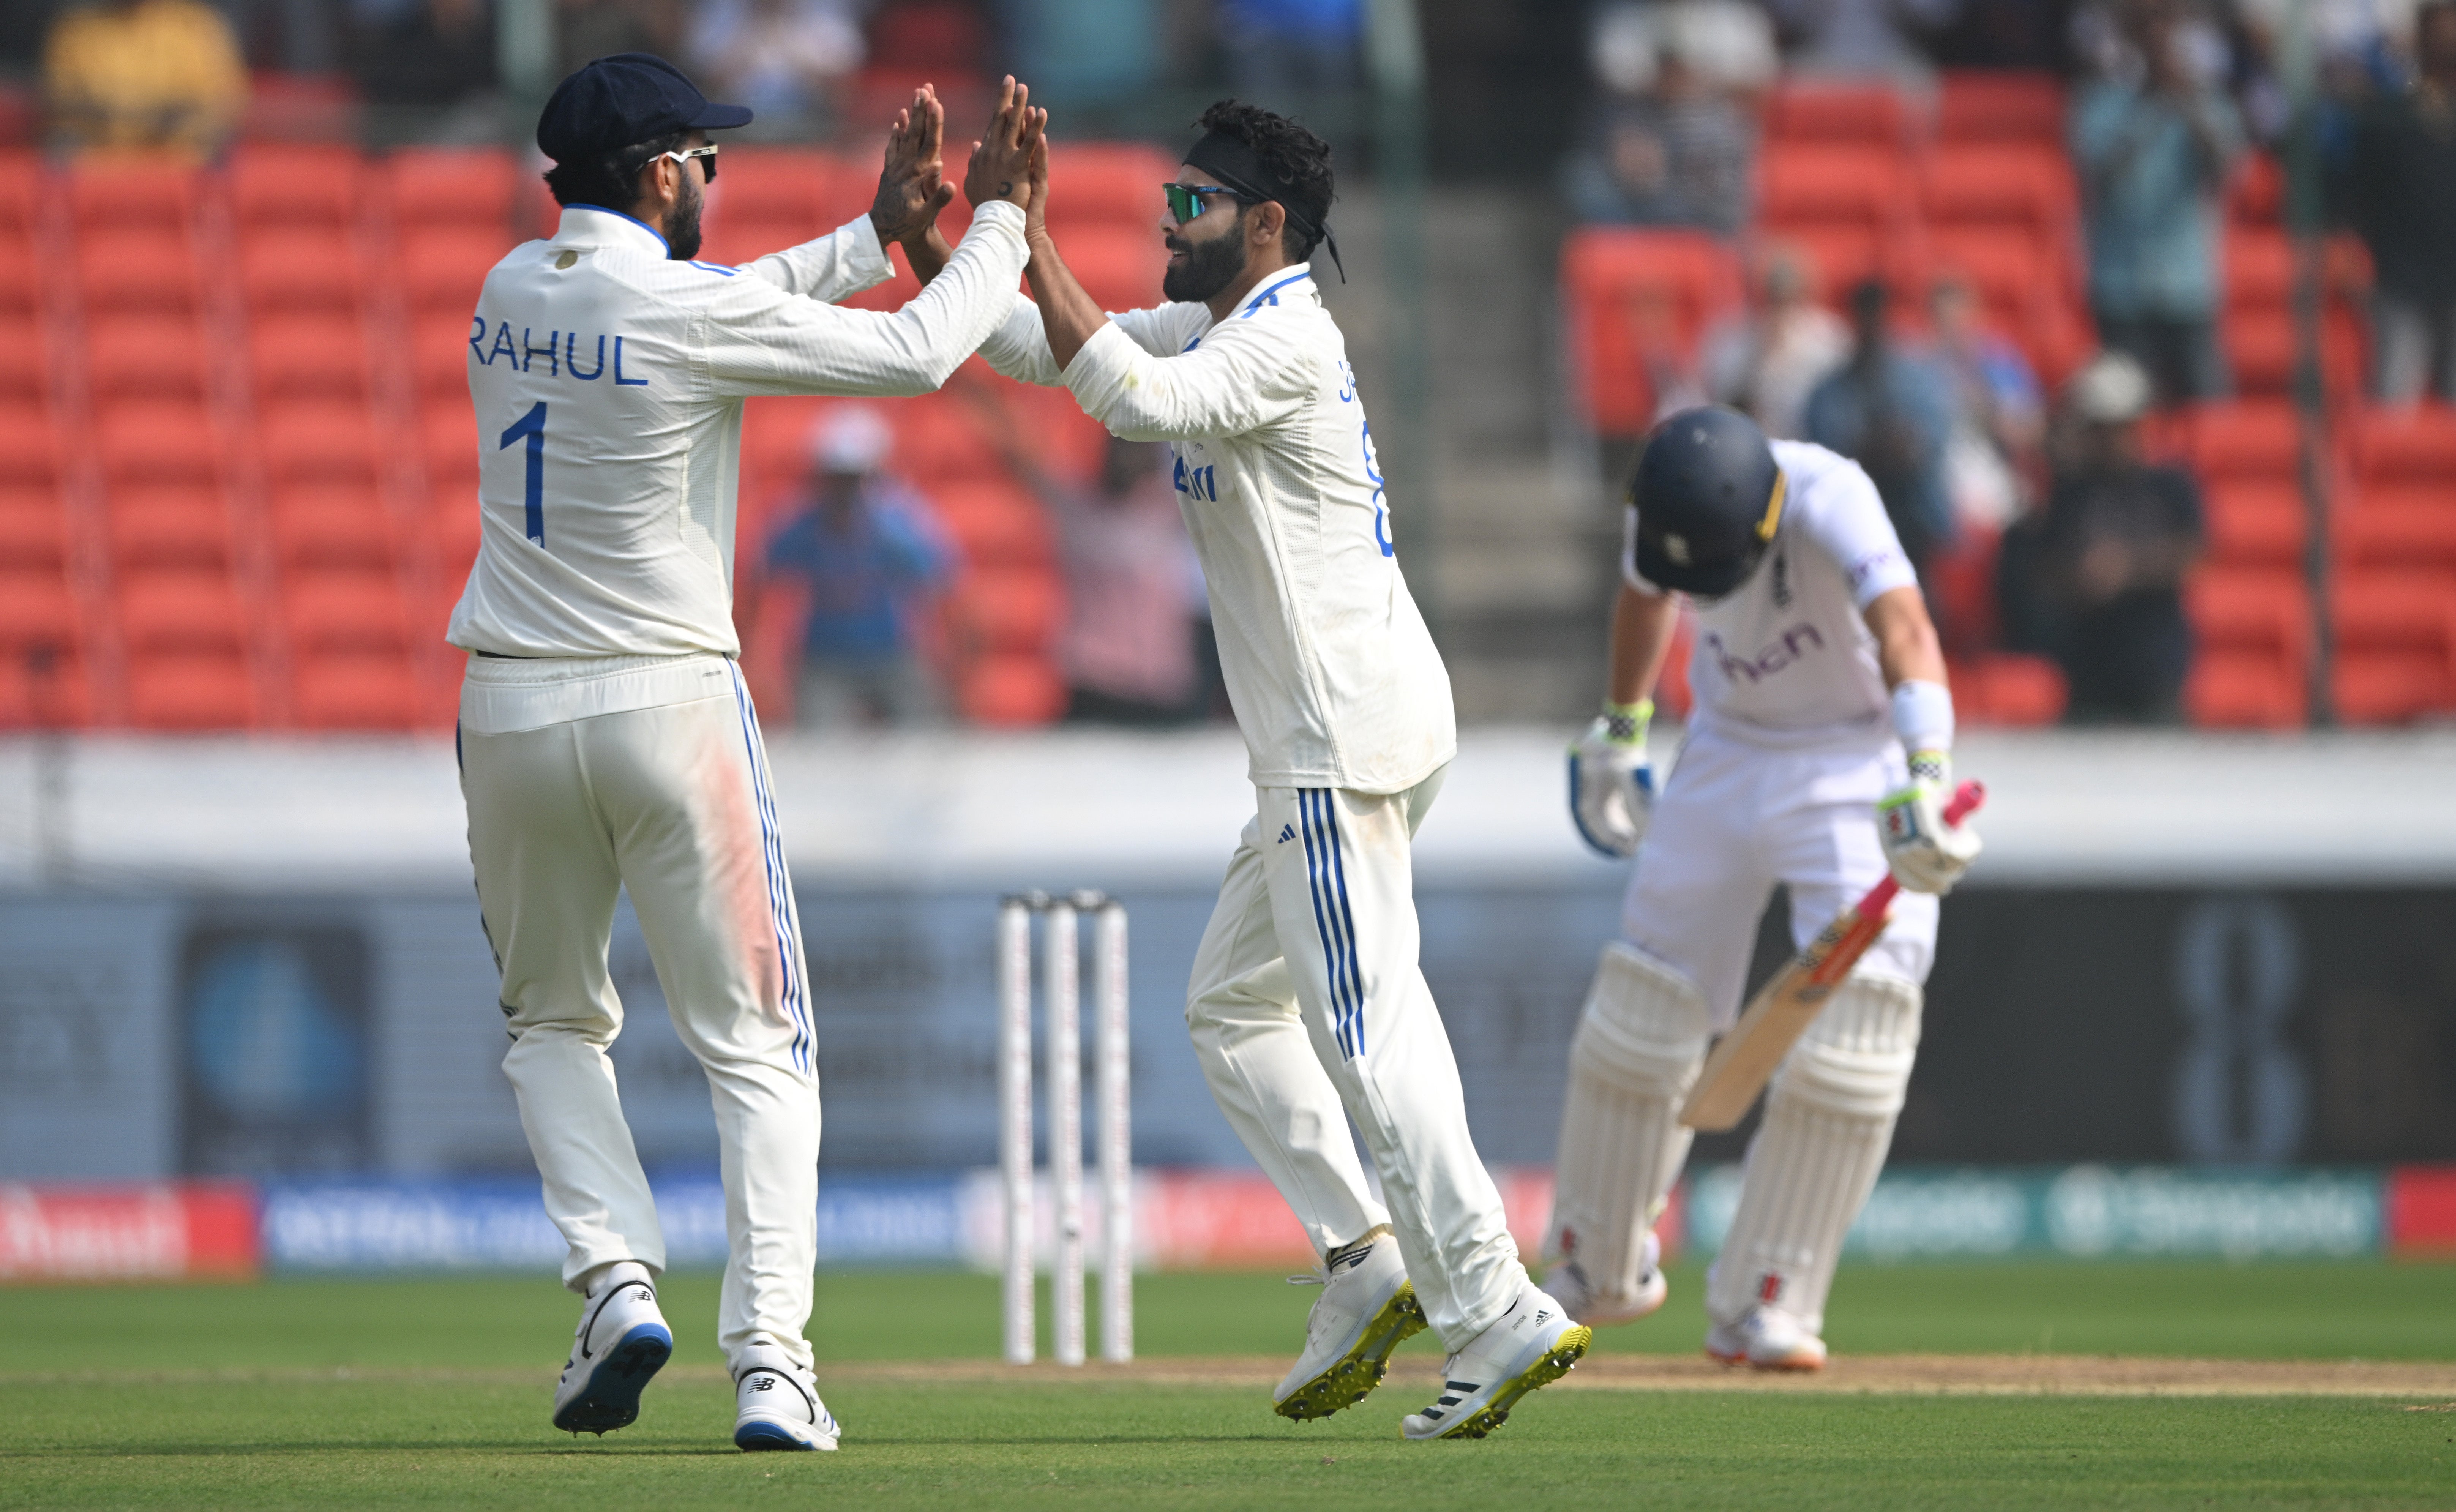 KL Rahul and Ravindra Jadeja have been ruled out of the second Test match against England